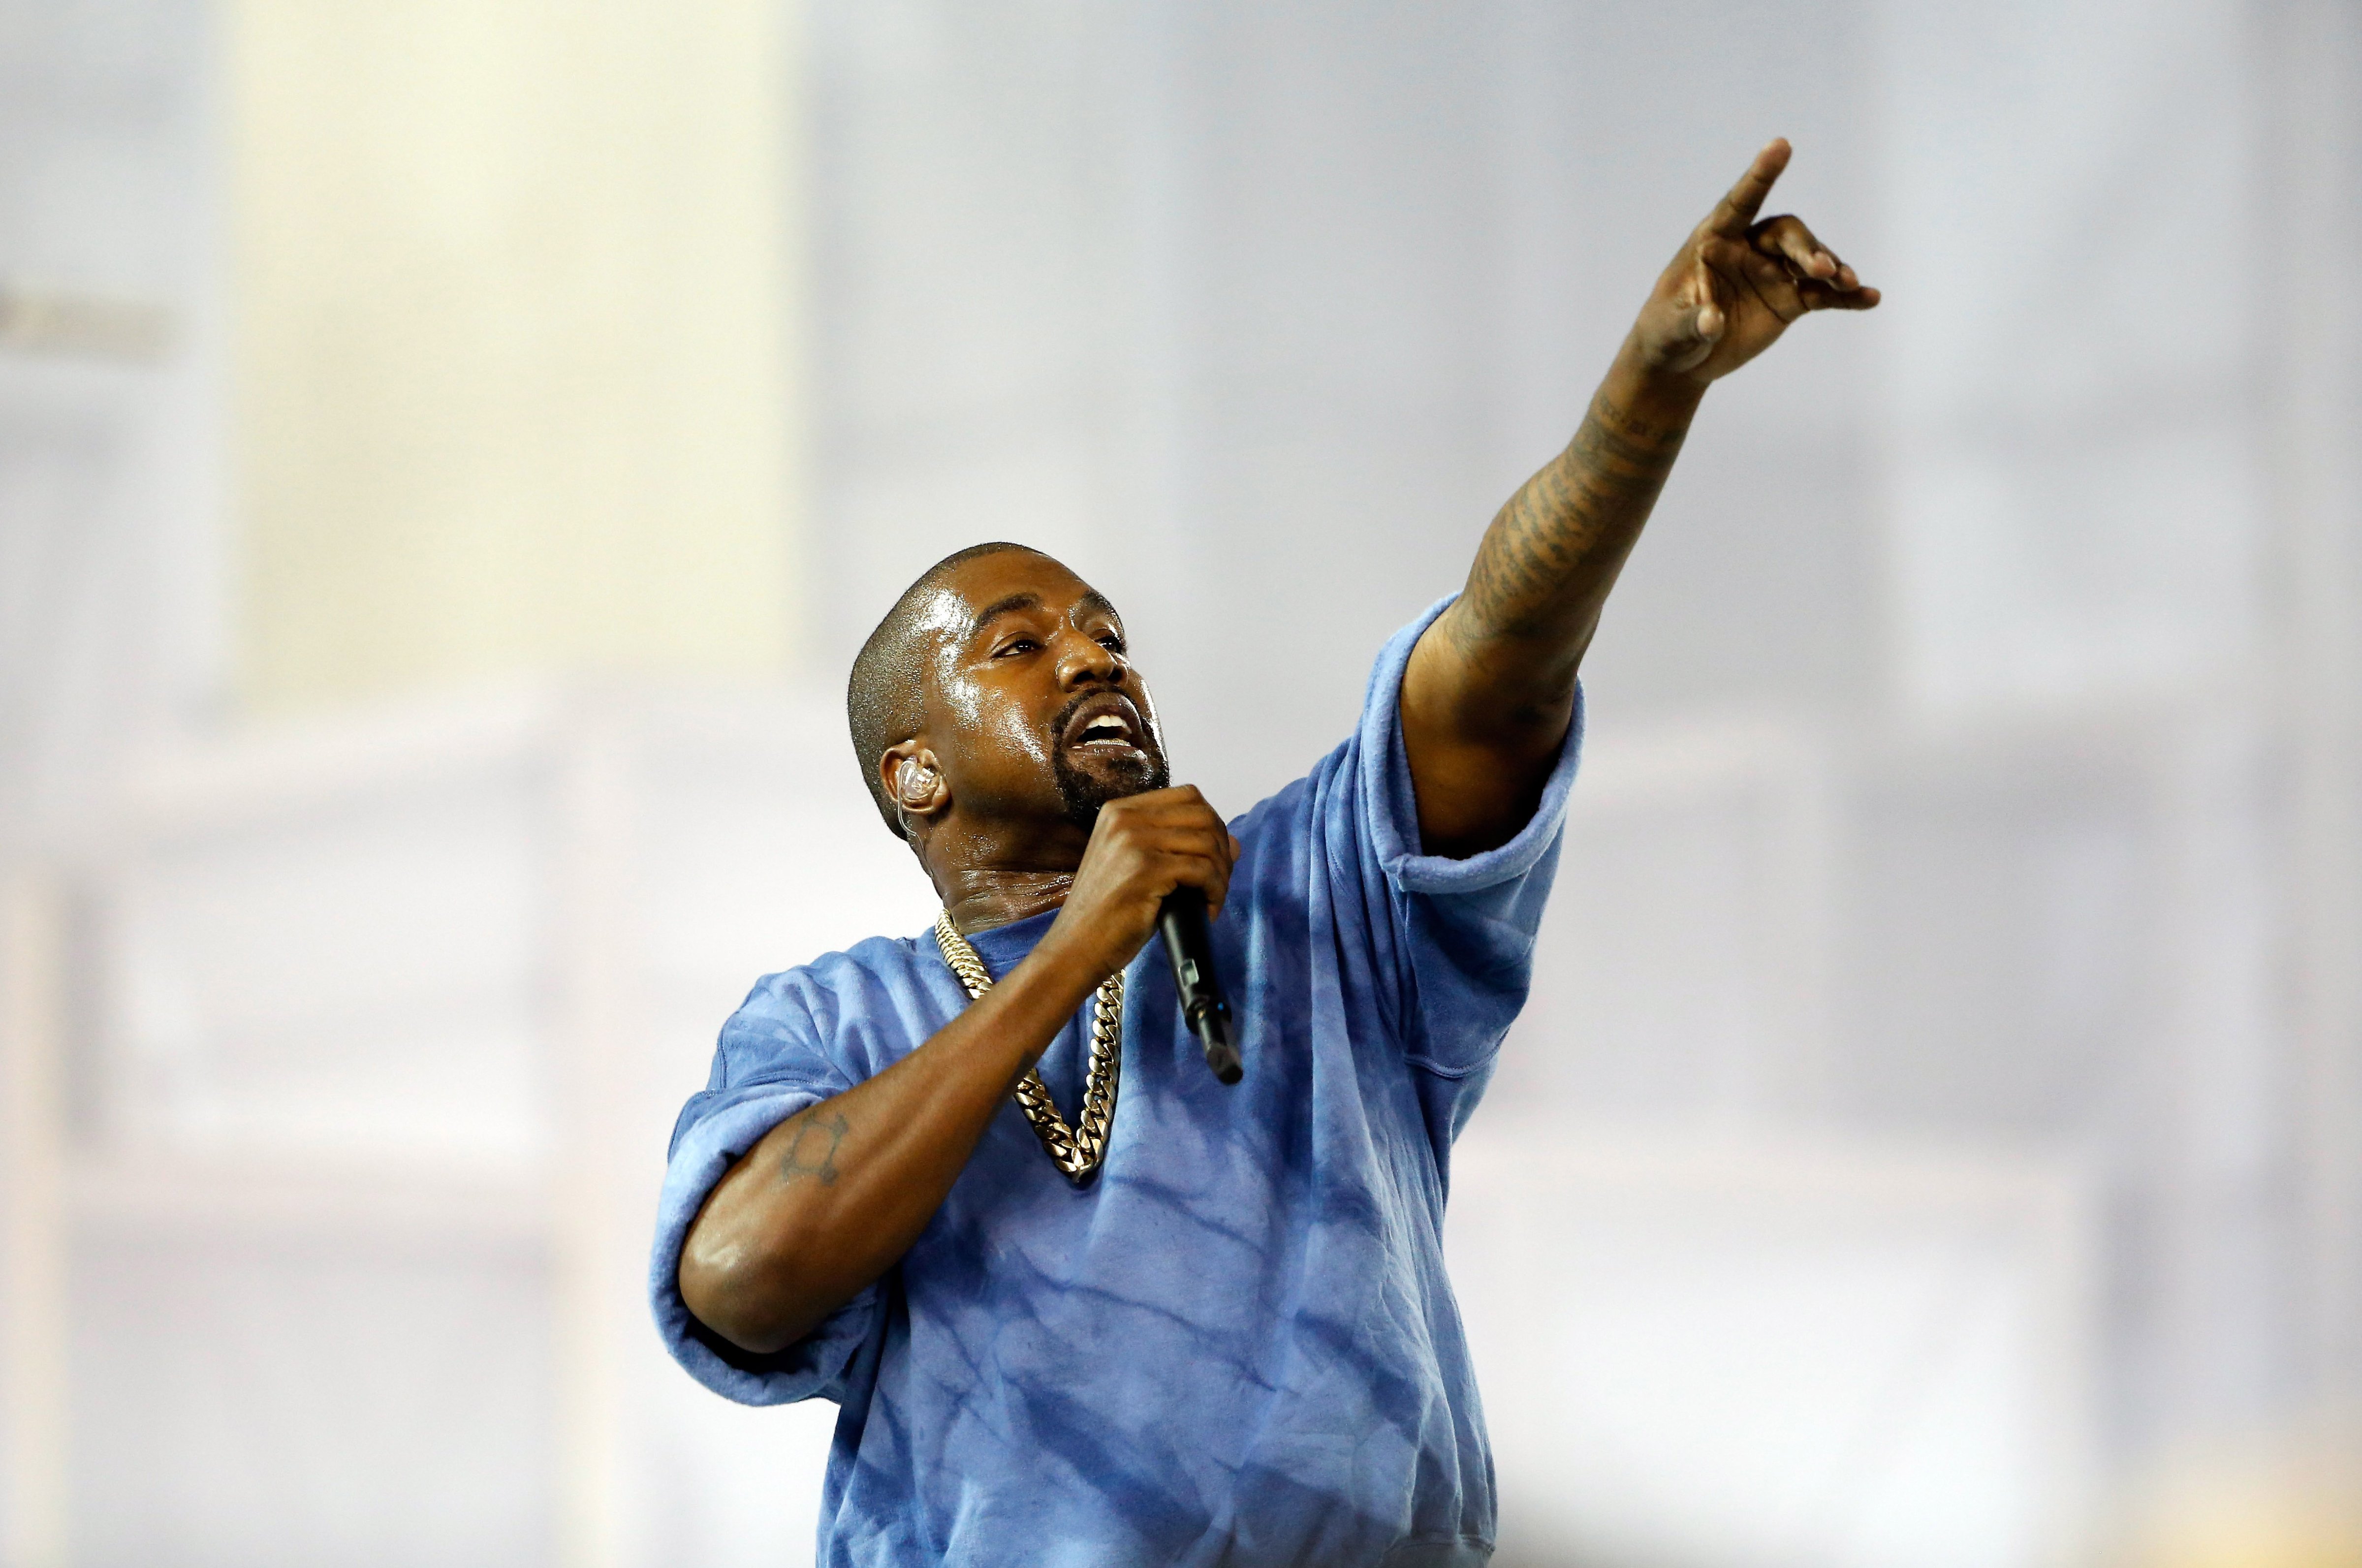 Kanye West preforms during the closing ceremony on Day 16 of the Toronto 2015 Pan Am Games on July 26, 2015 in Toronto. (Ezra Shaw—Getty Images)